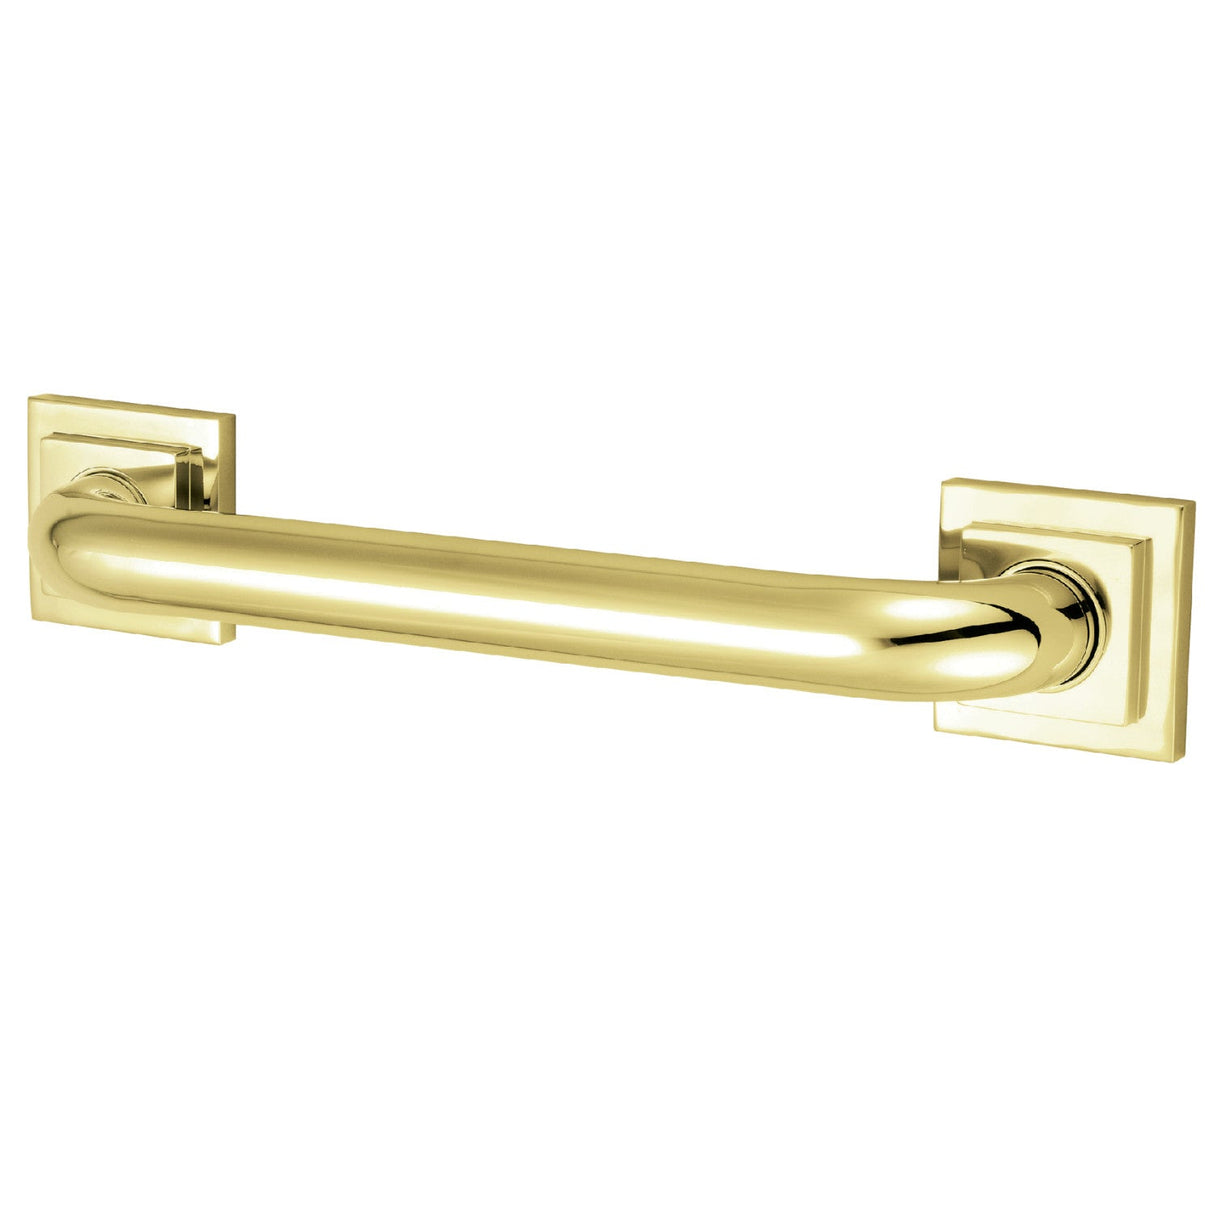 Claremont Thrive In Place DR614302 30-Inch x 1-1/4 Inch O.D Grab Bar, Polished Brass